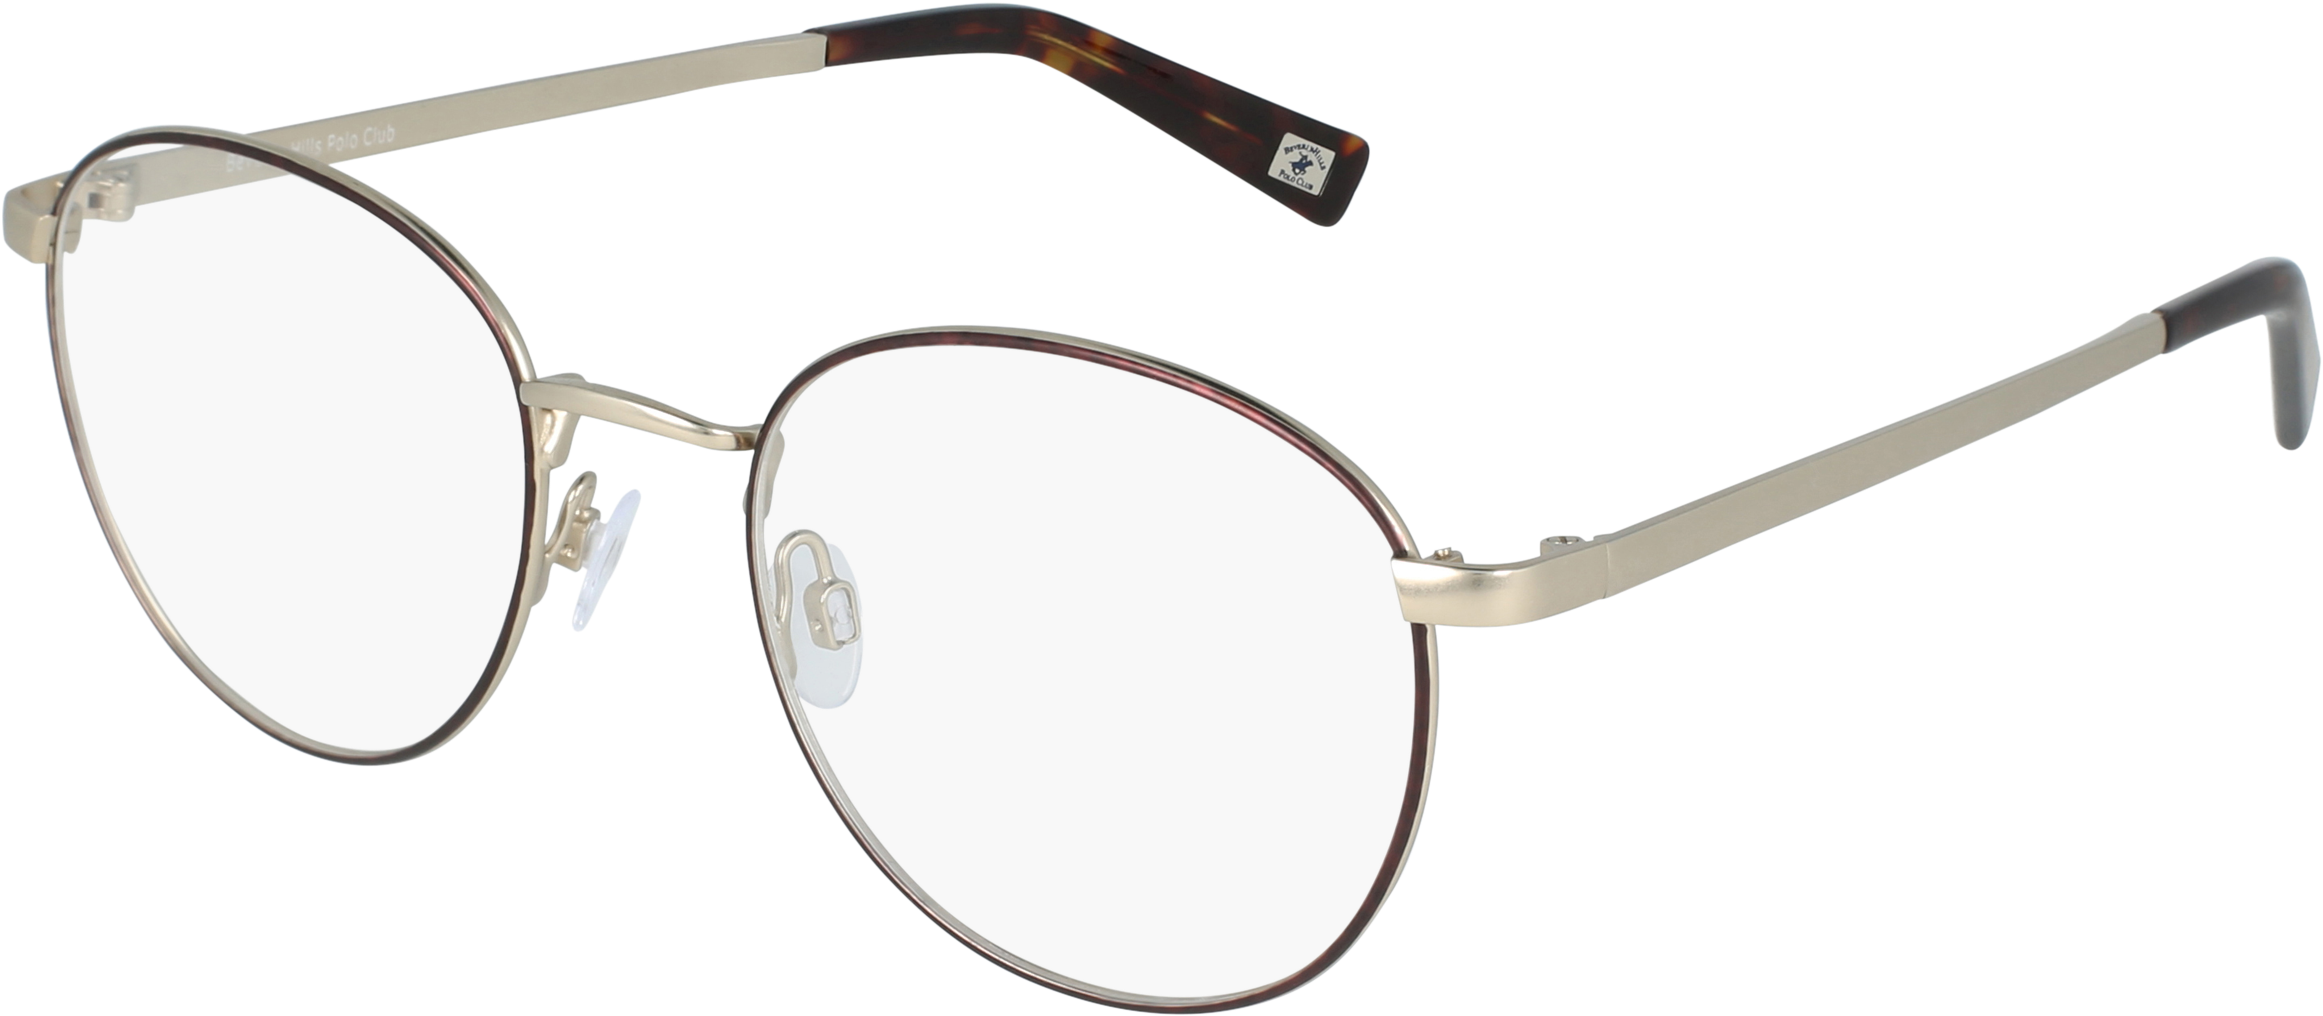 A Close Up Of A Pair Of Glasses